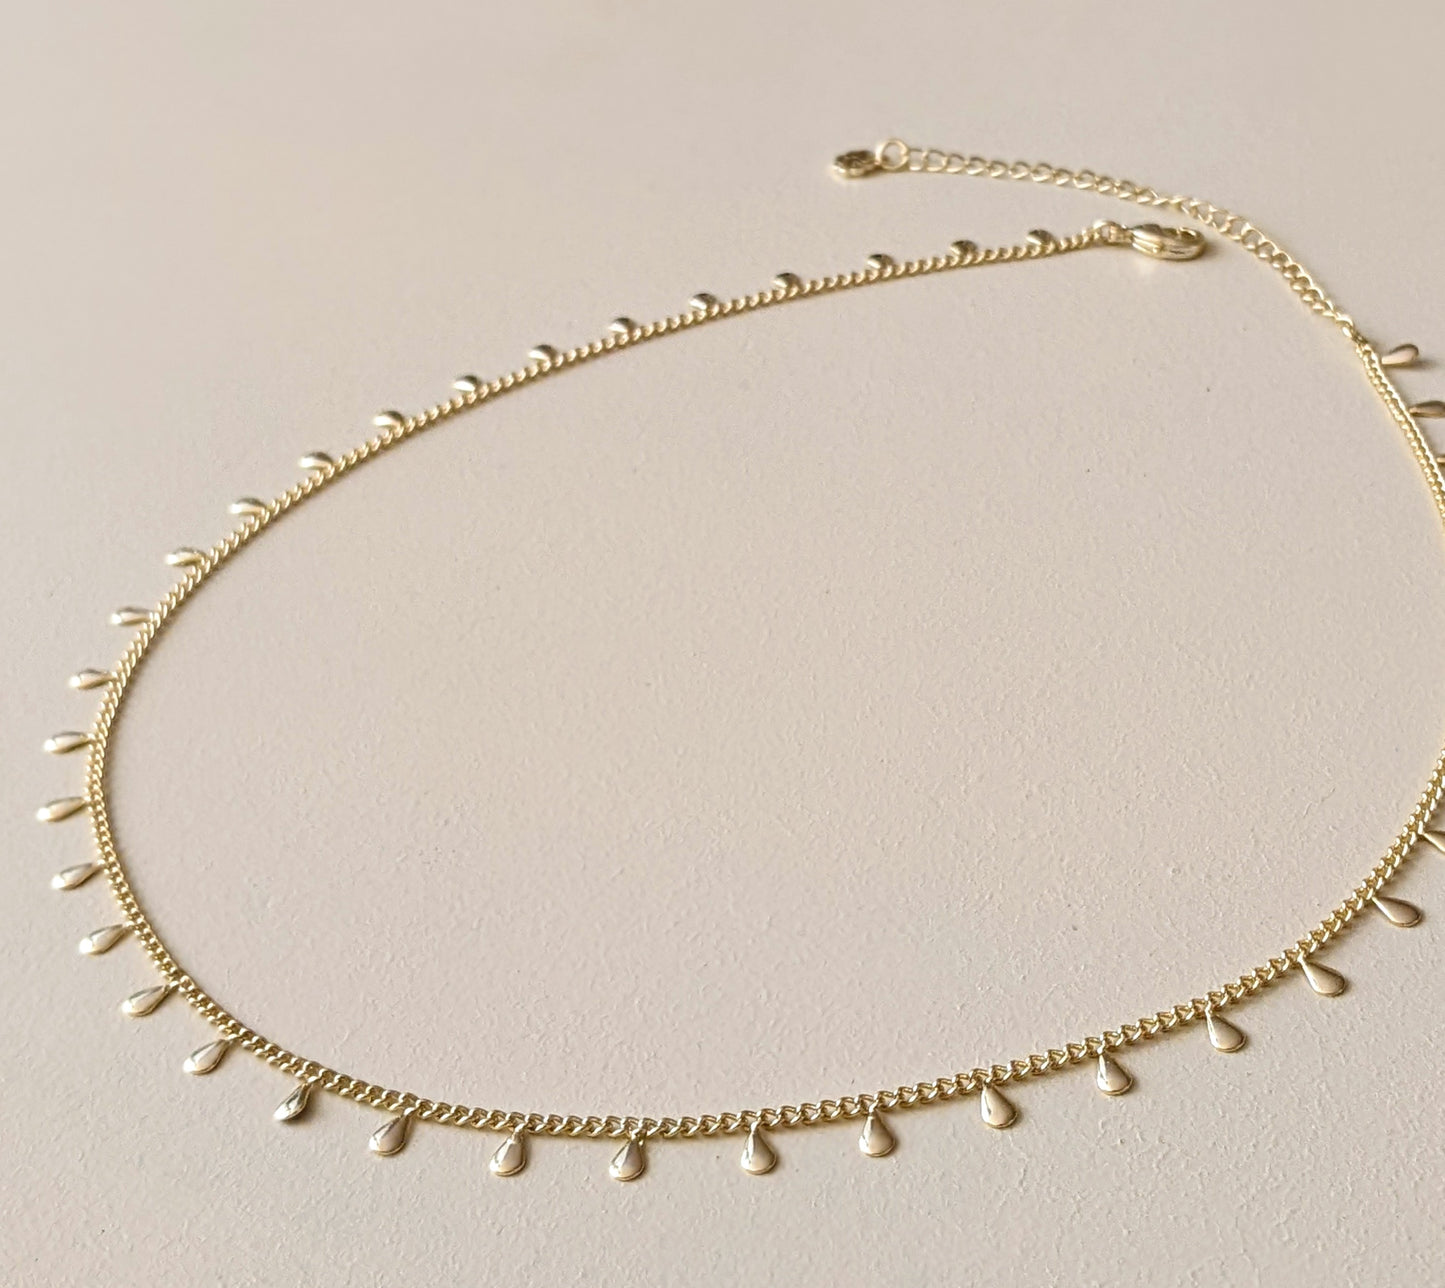 Caprice Gold Necklace